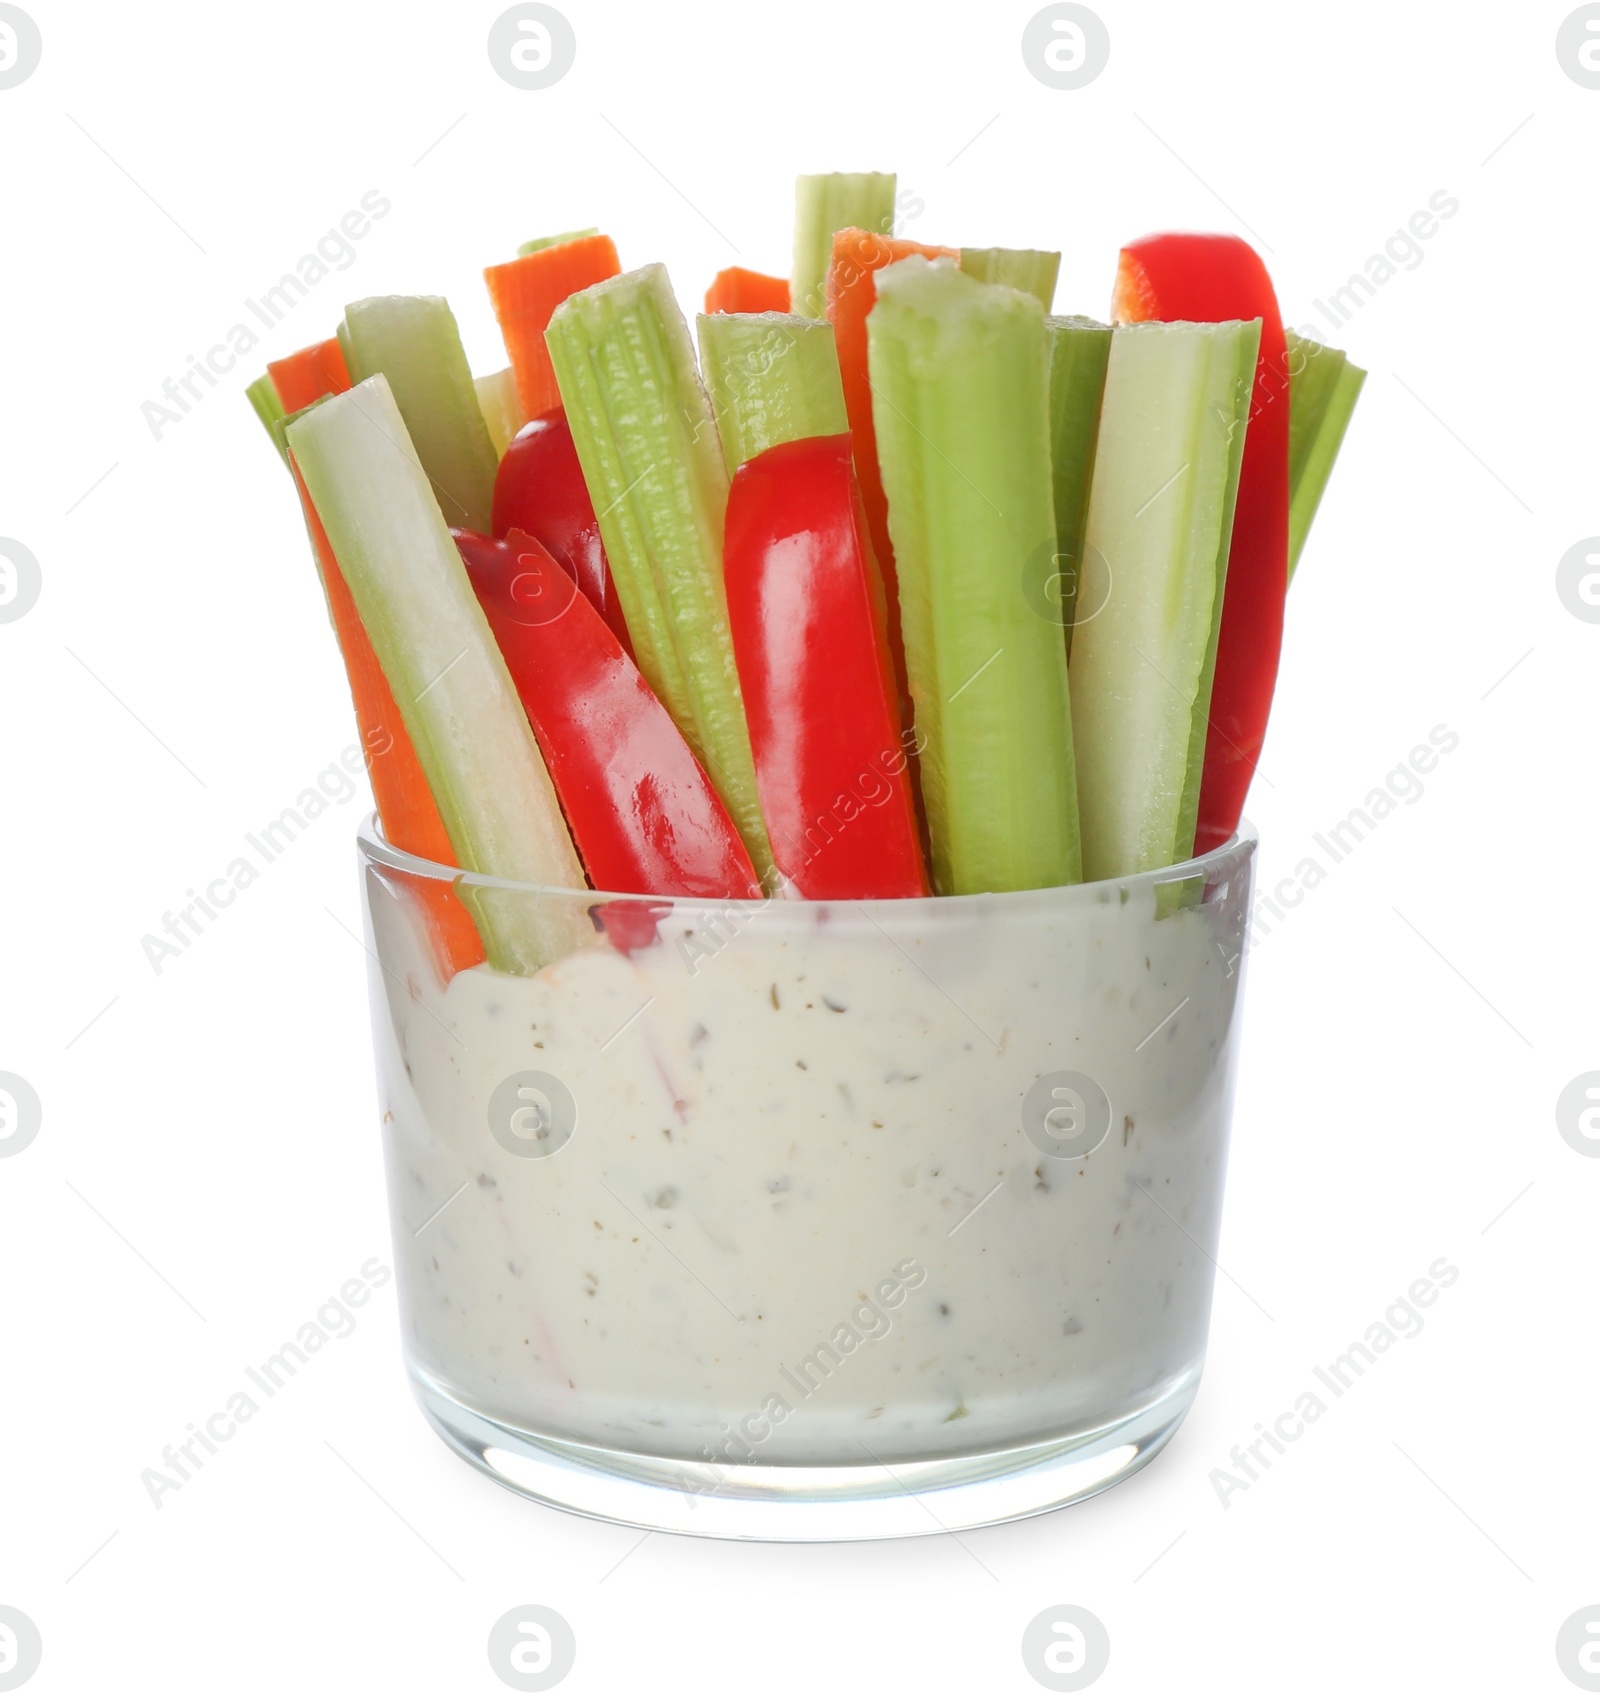 Photo of Celery and other vegetable sticks with dip sauce in glass bowl isolated on white